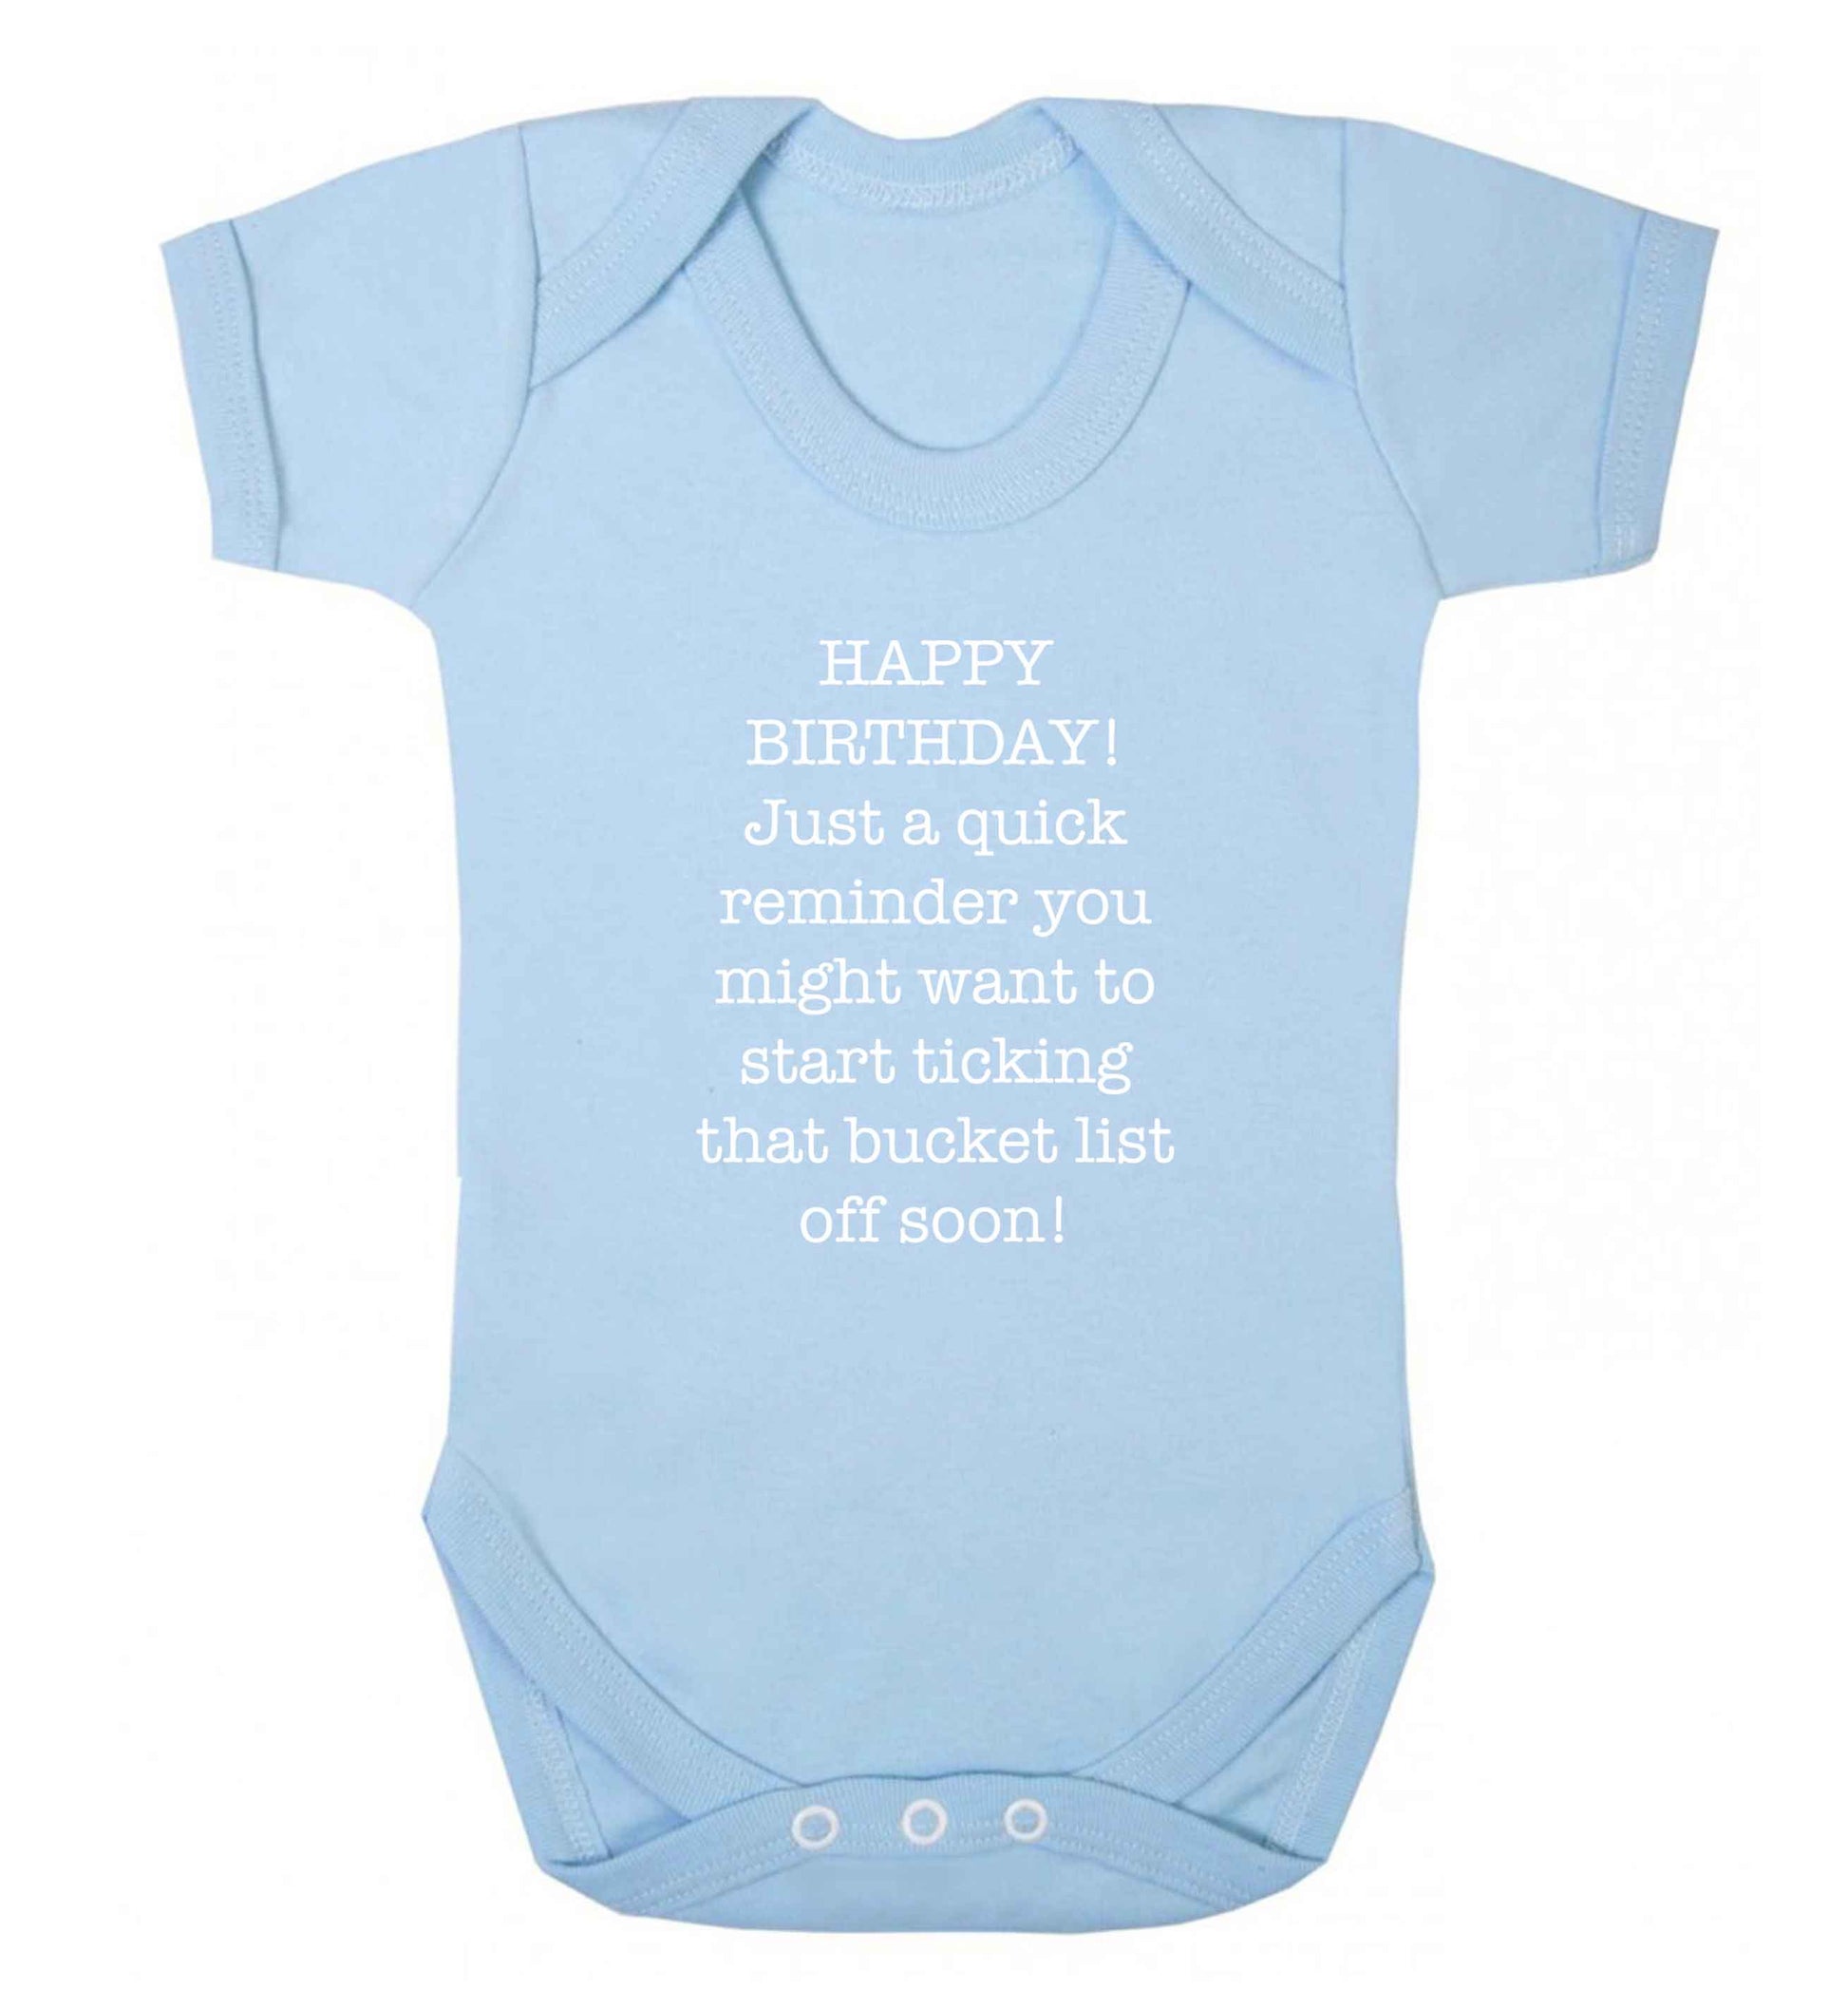 Happy birthday, just a quick reminder you might want to start ticking that bucket list off soon baby vest pale blue 18-24 months